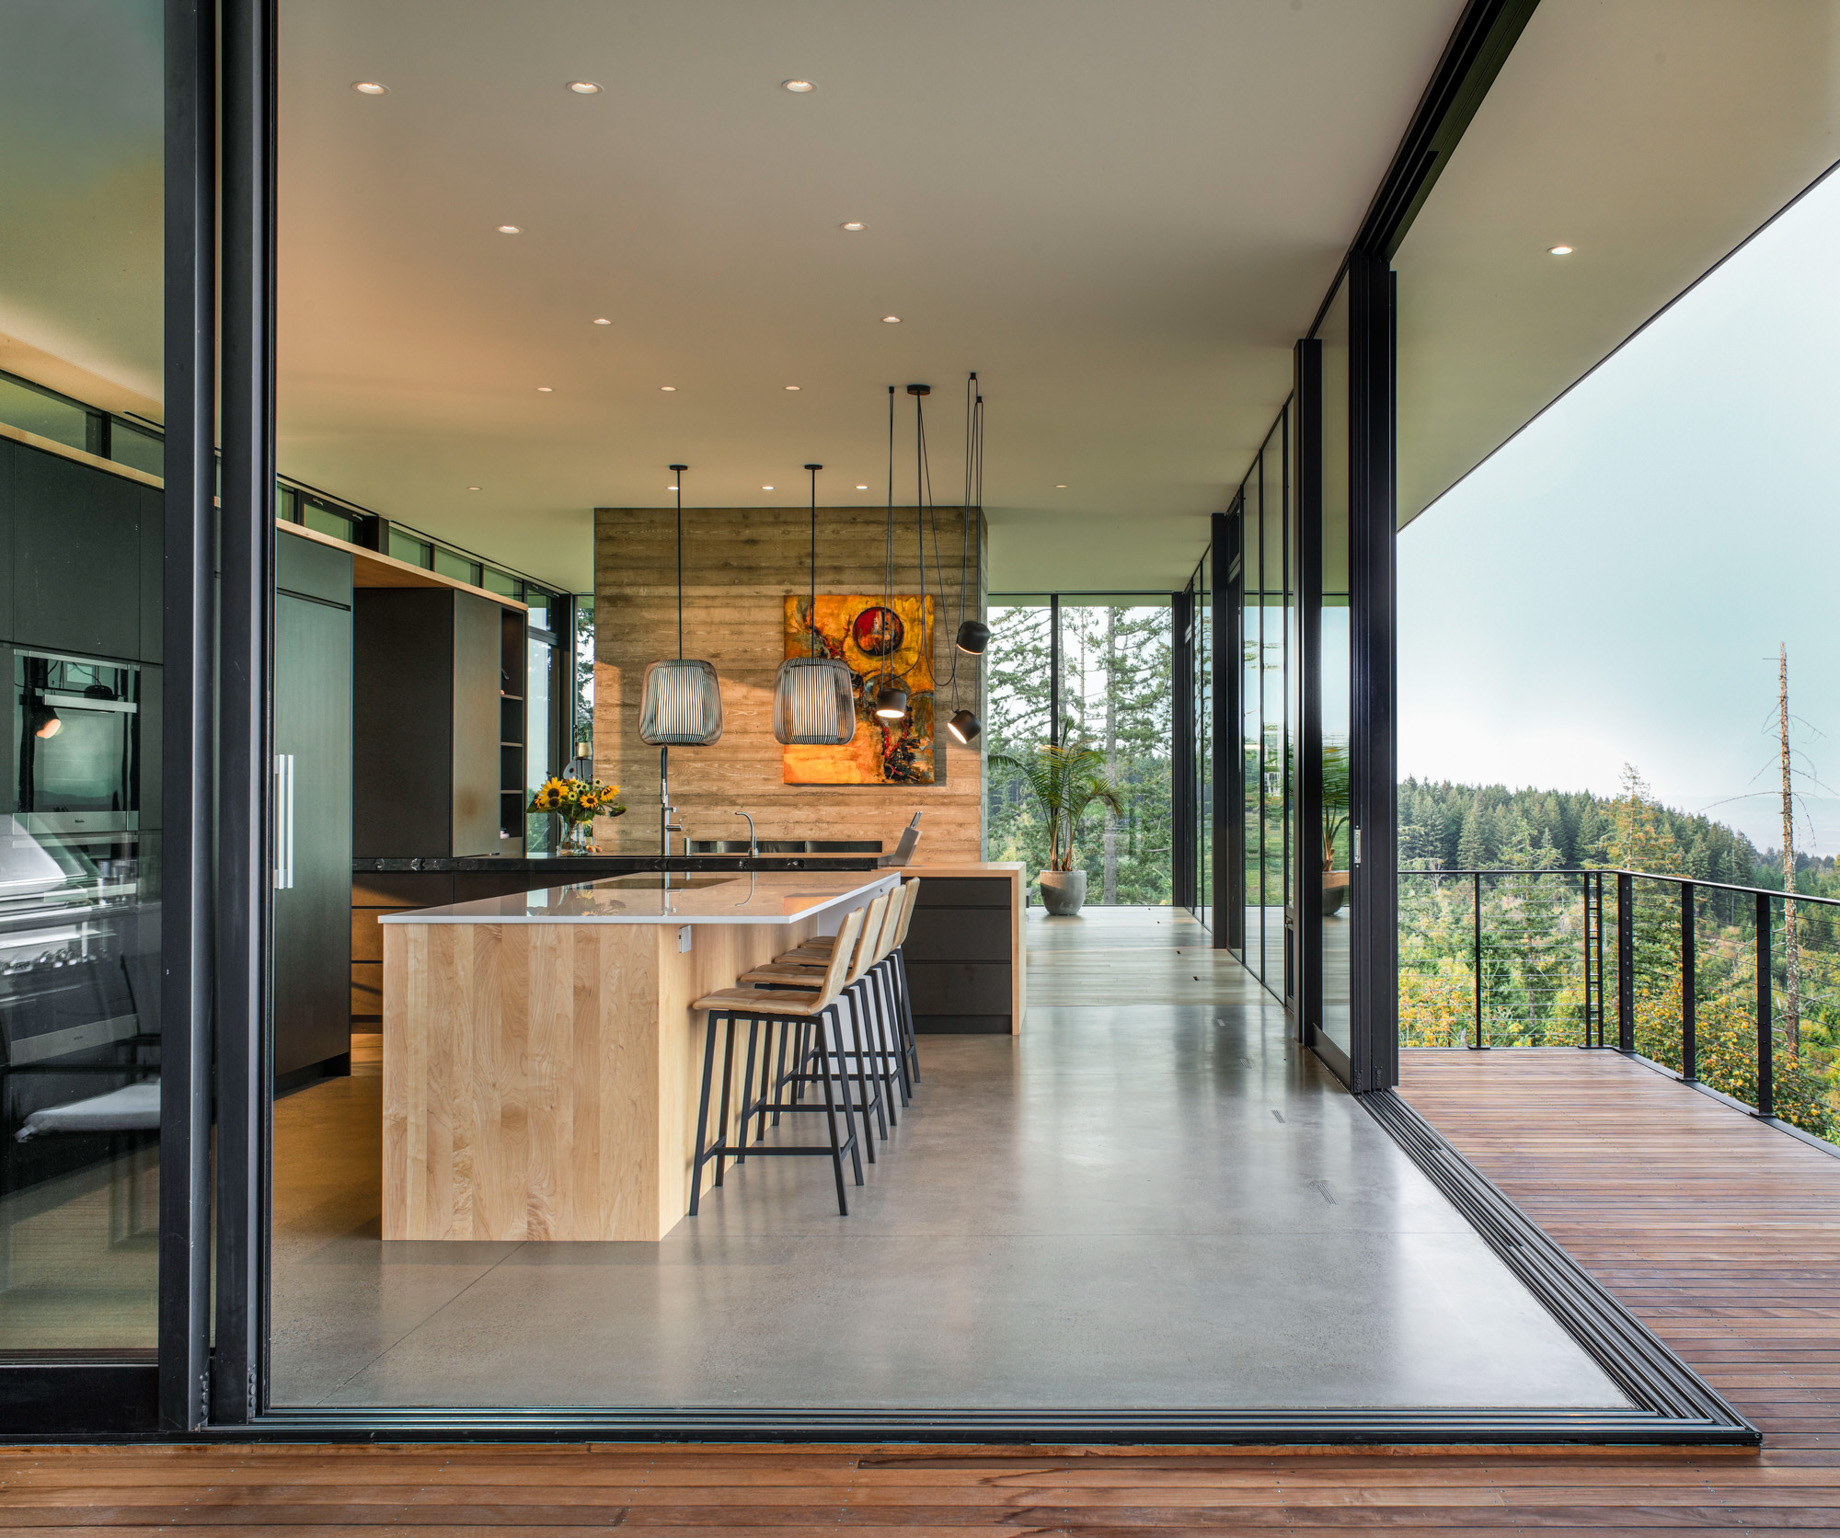 Five Peaks Lookout Residence – Yamhill County, OR, USA